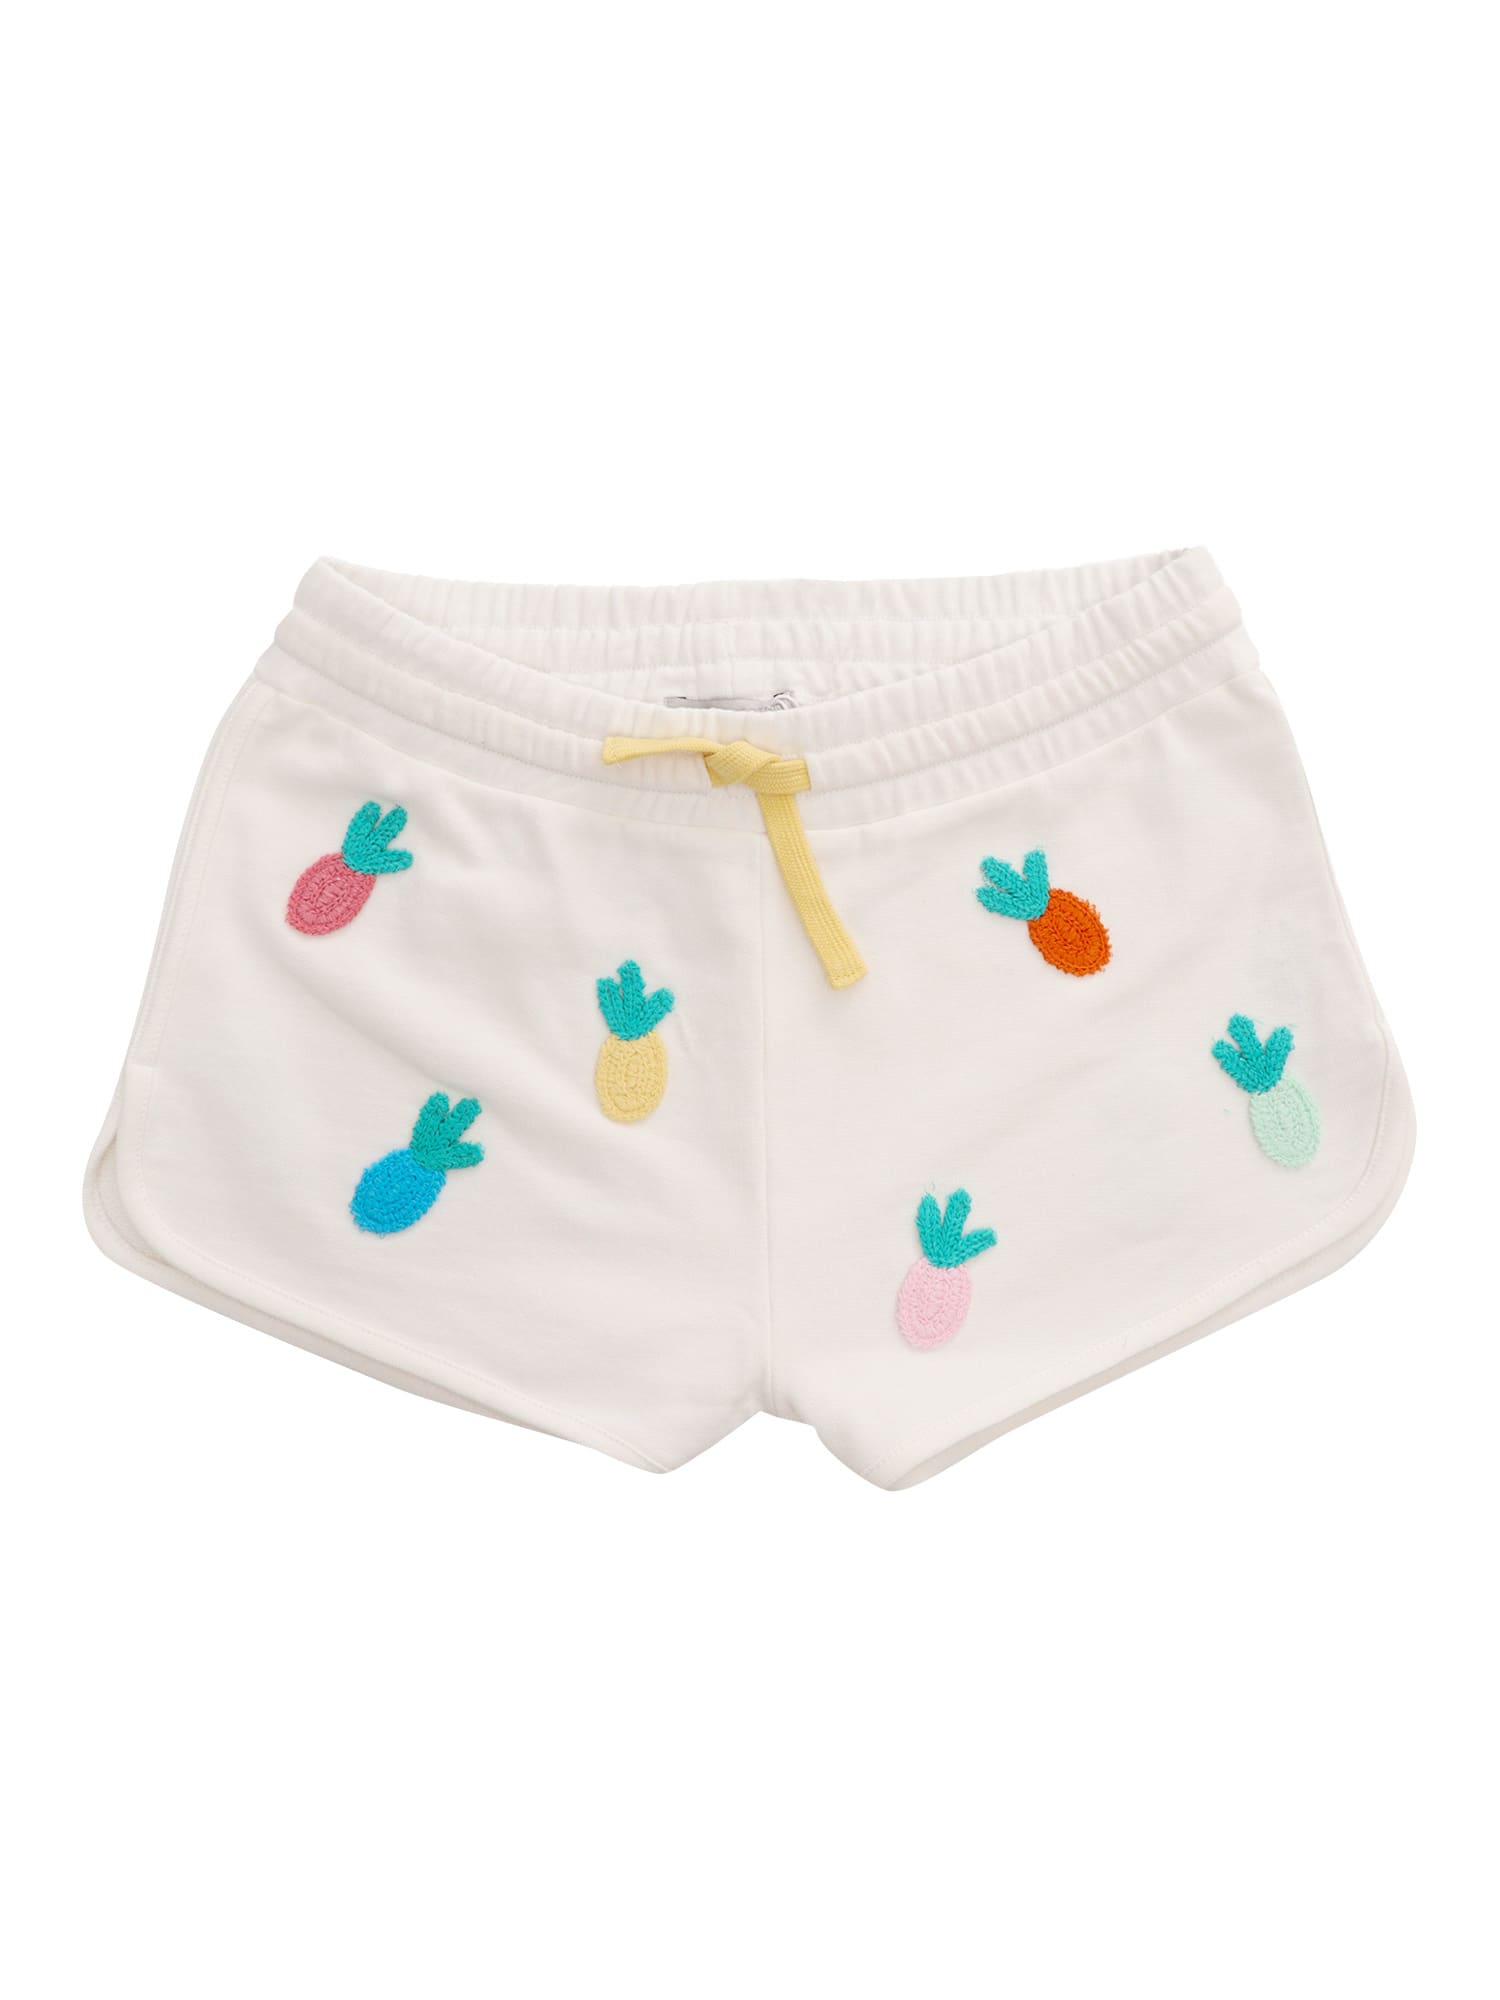 Stella Mccartney Kids' White Shorts With Embroidery